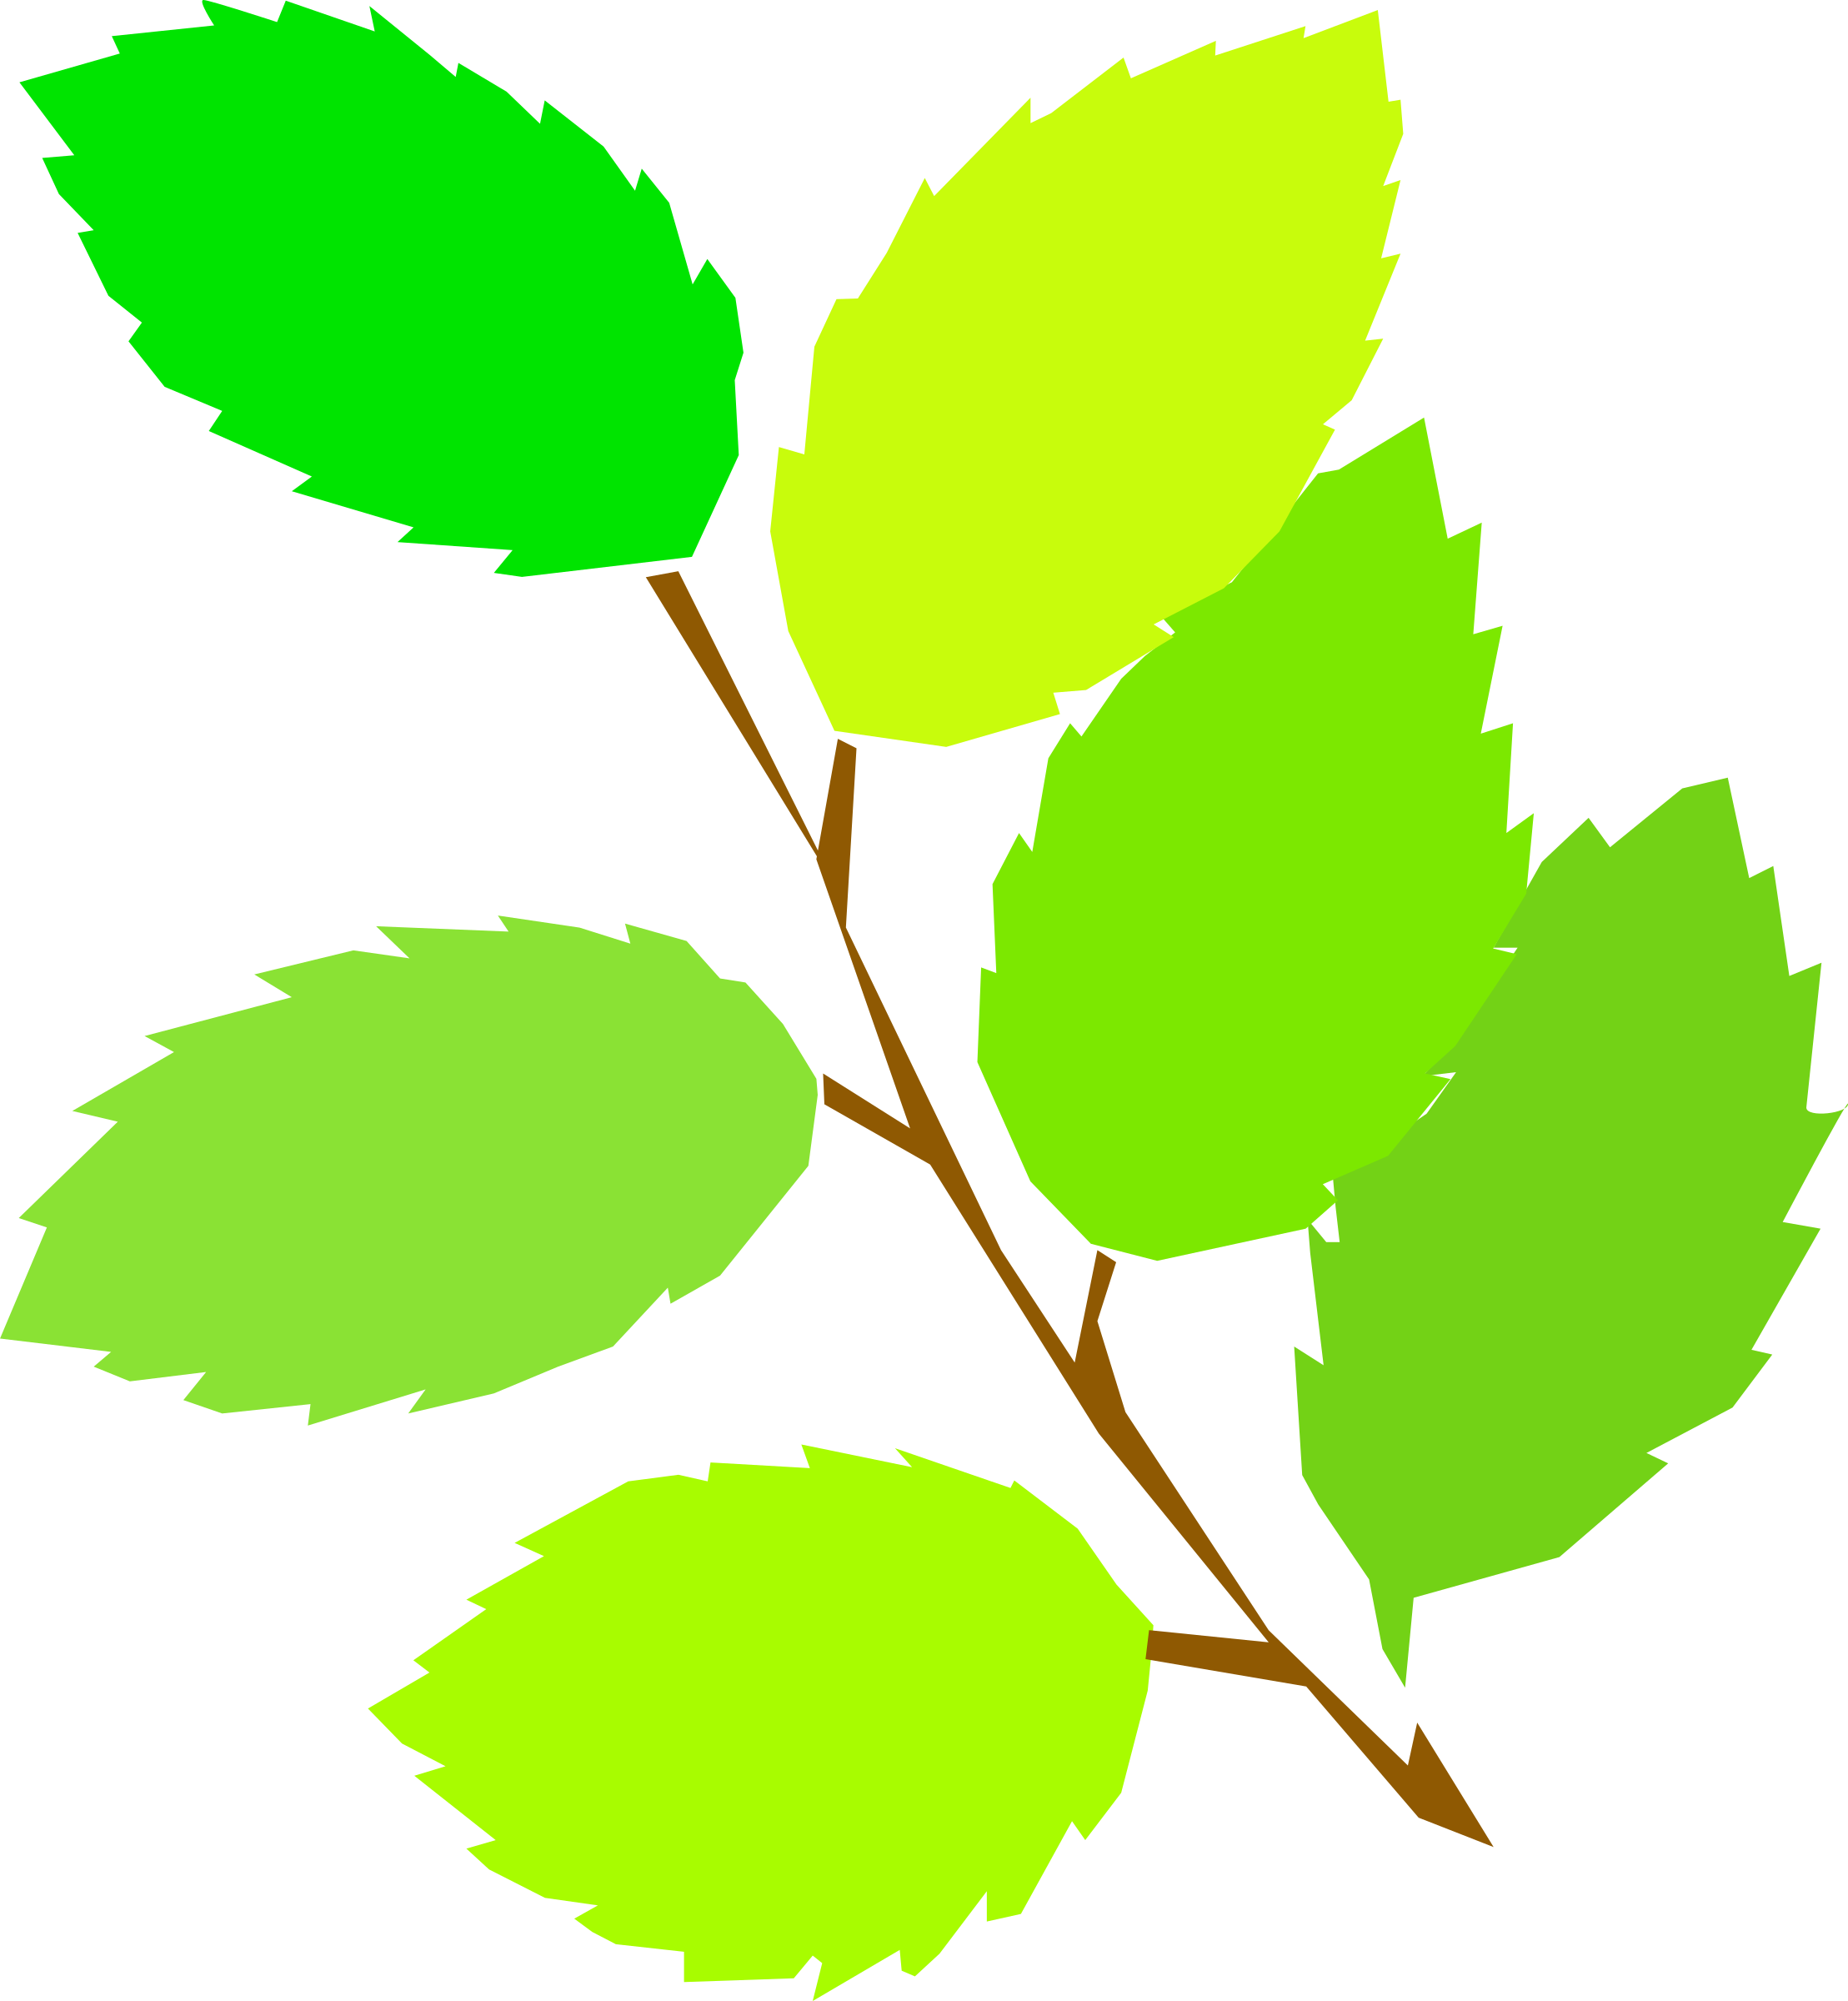 Leaves clipart free download on WebStockReview